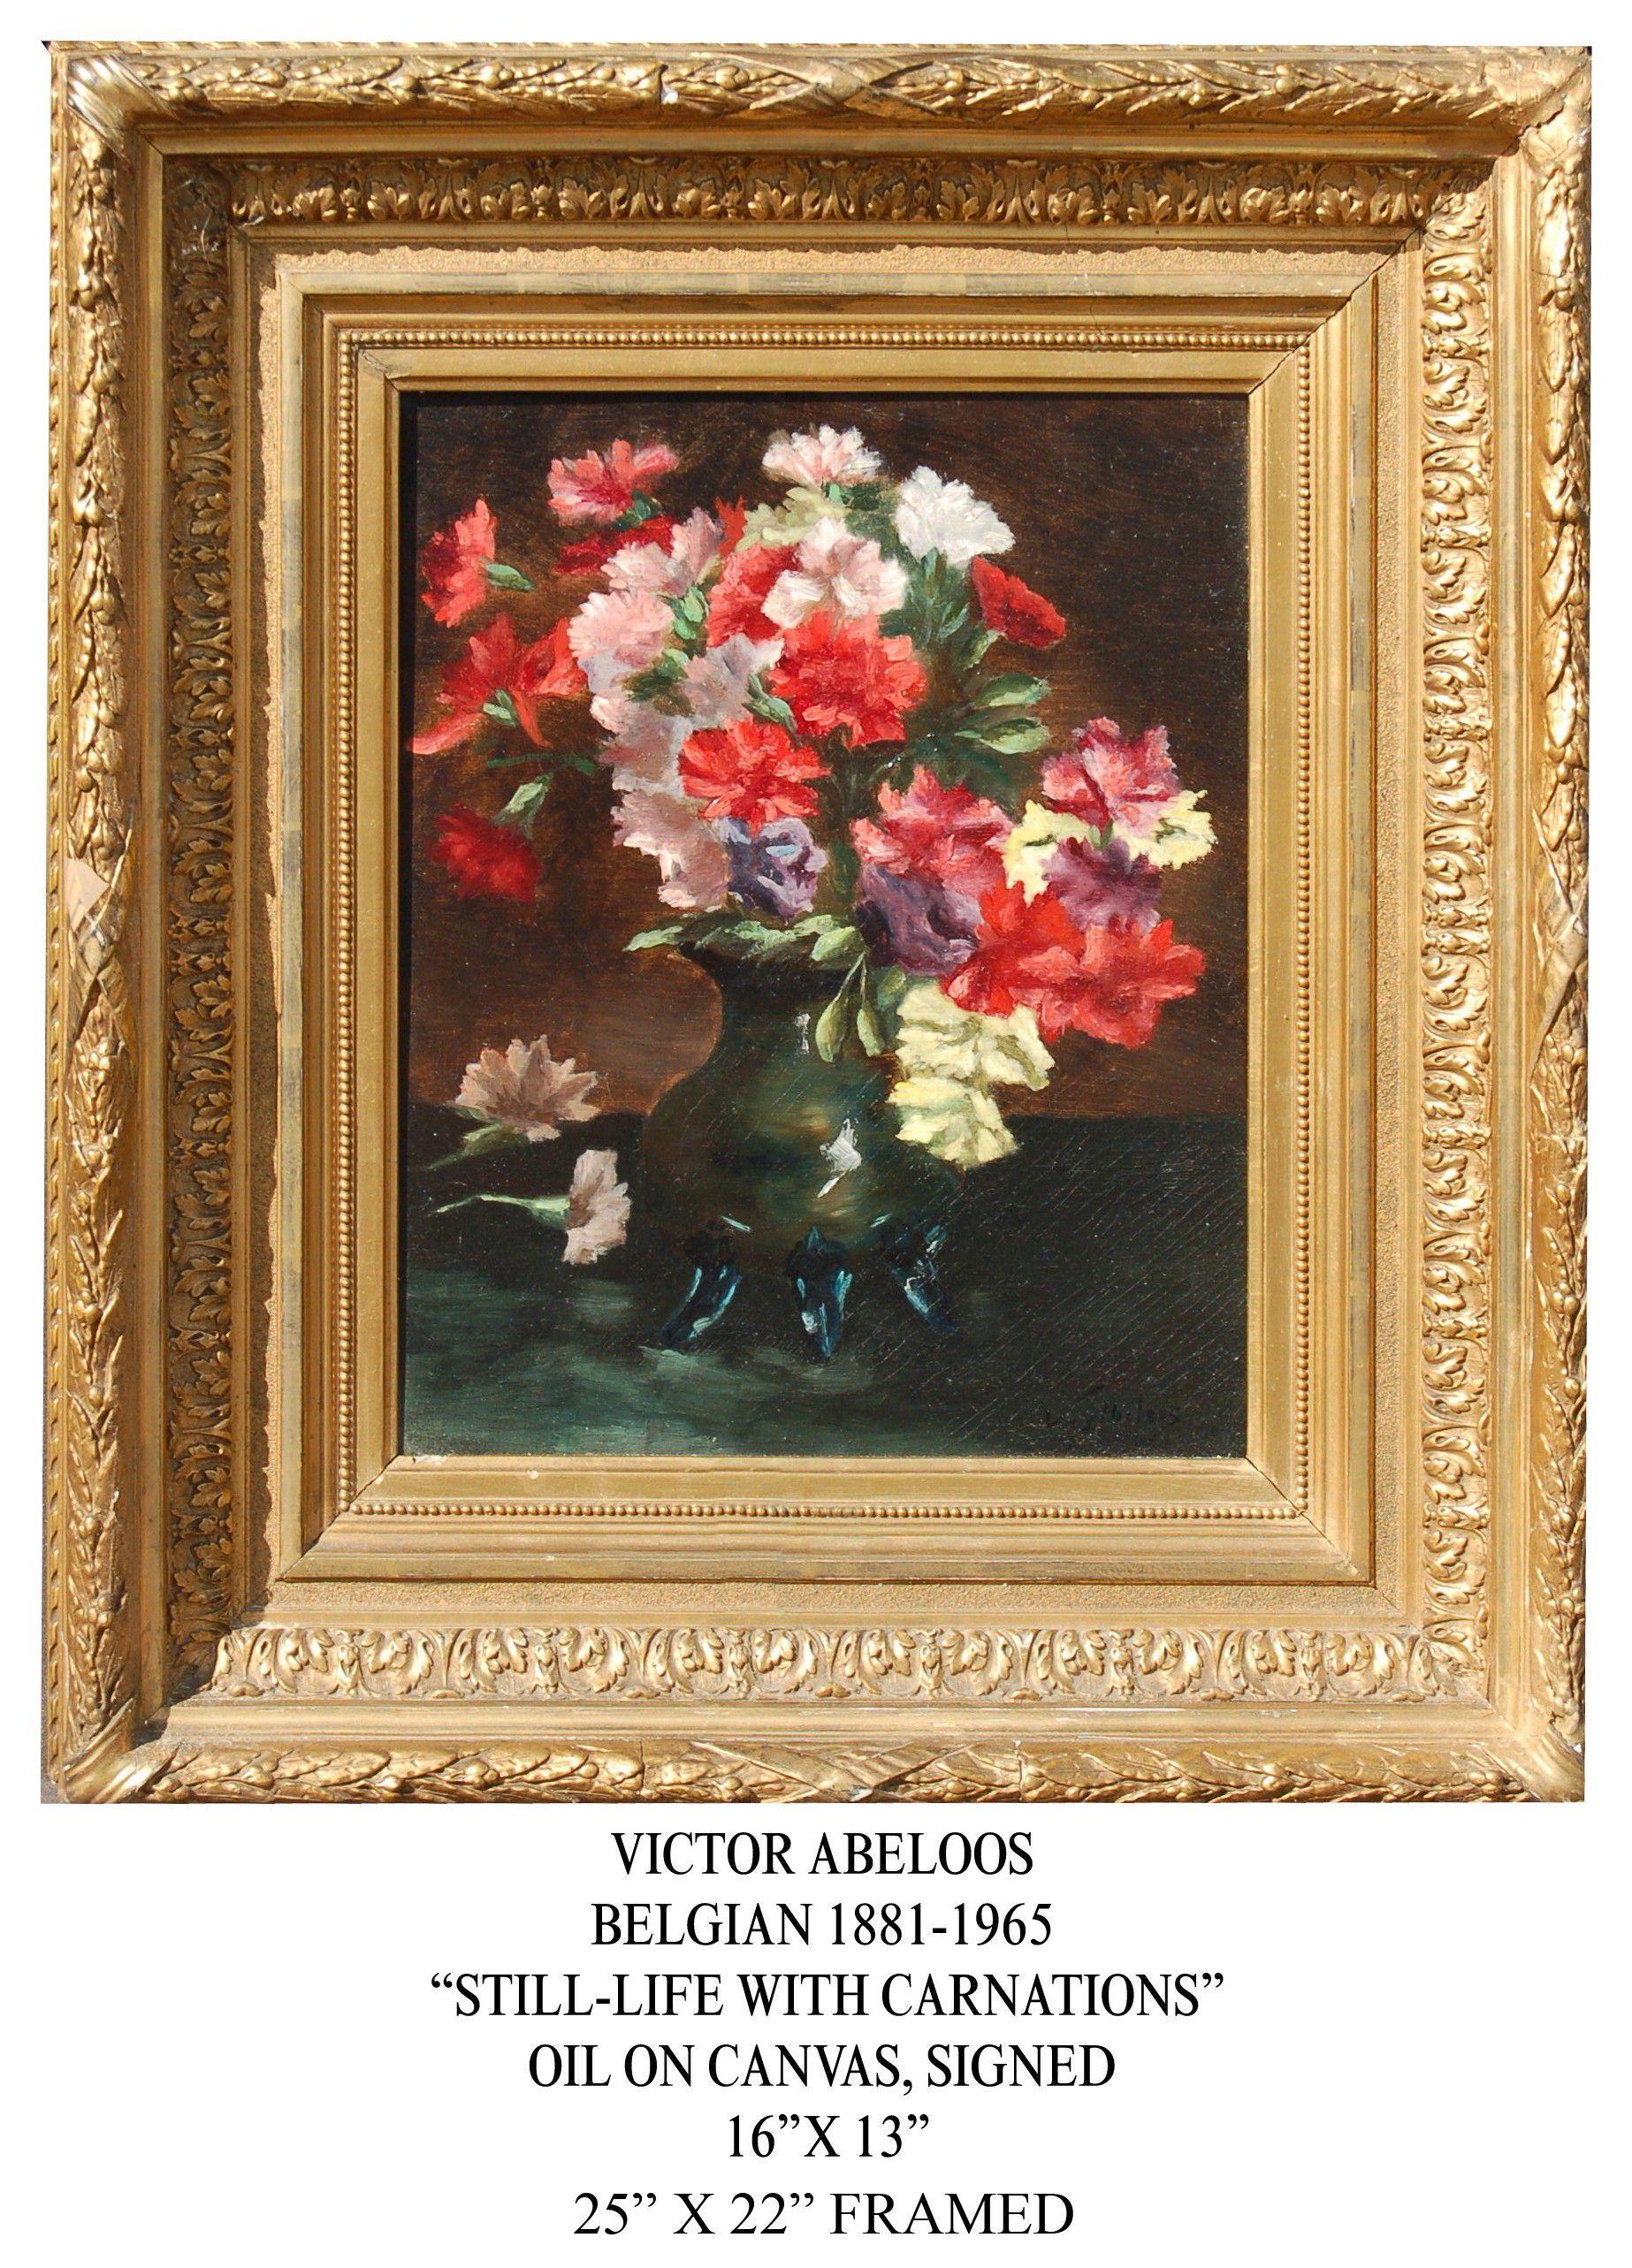 20th century Belgium oil, still-life of flowers, carnations in a vase. - Painting by Abeloos, Victor